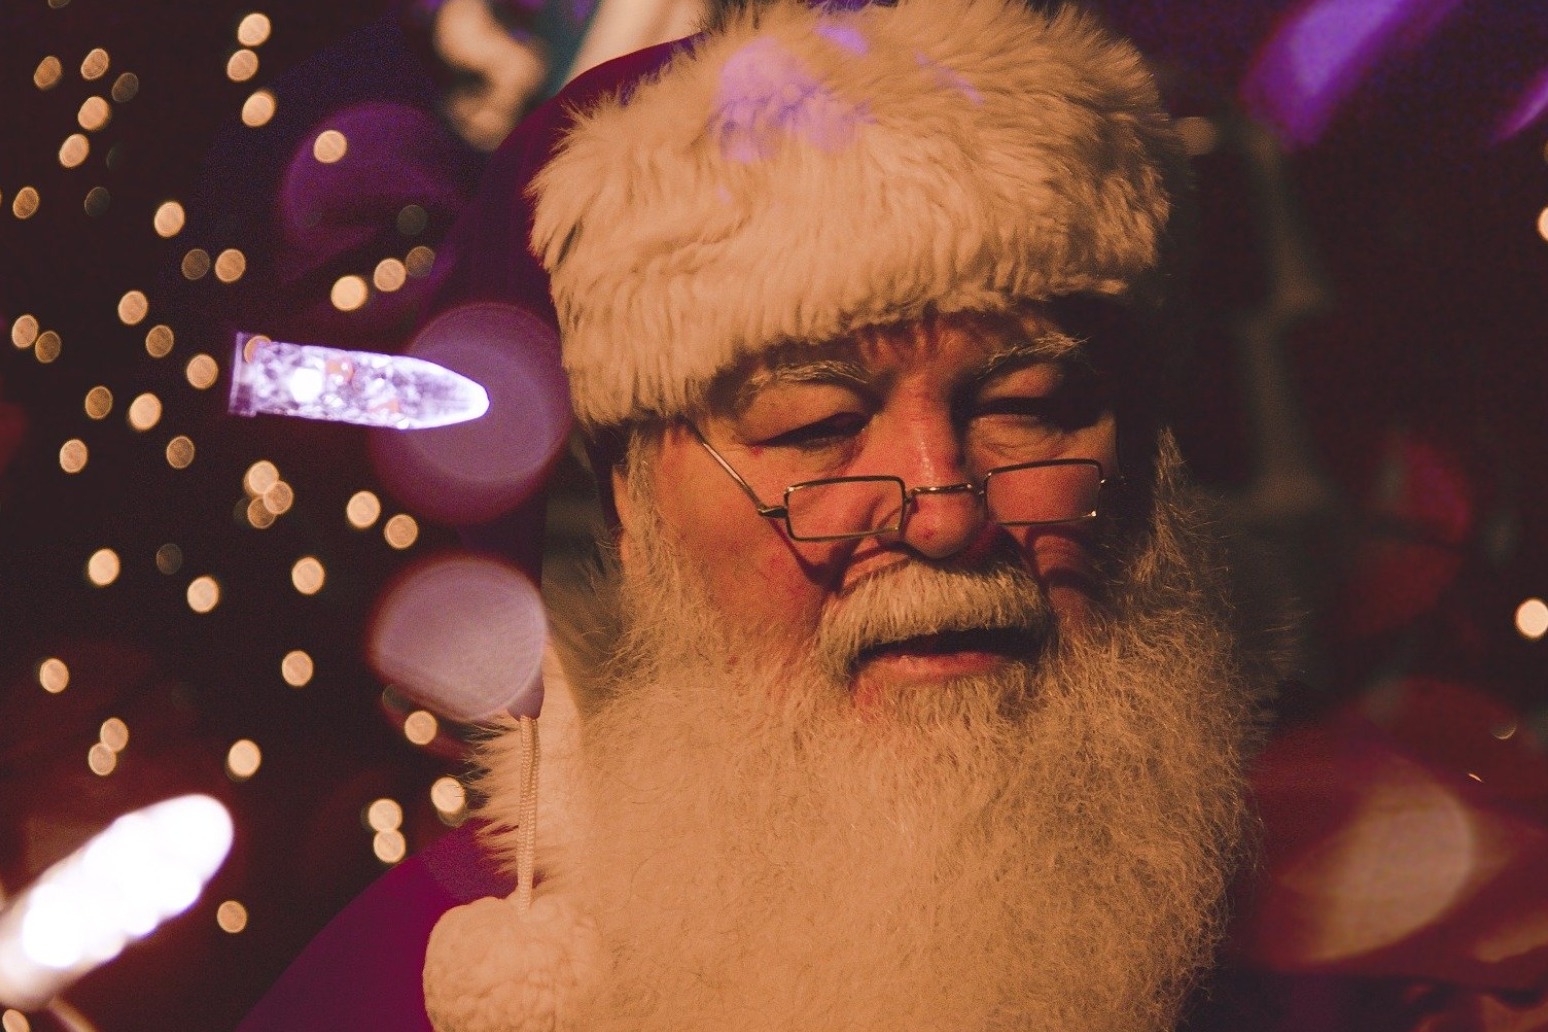 SANTA SPOTTING: PARENTS TURN TO SMART TECH TO PROVE FATHER CHRISTMAS IS REAL 